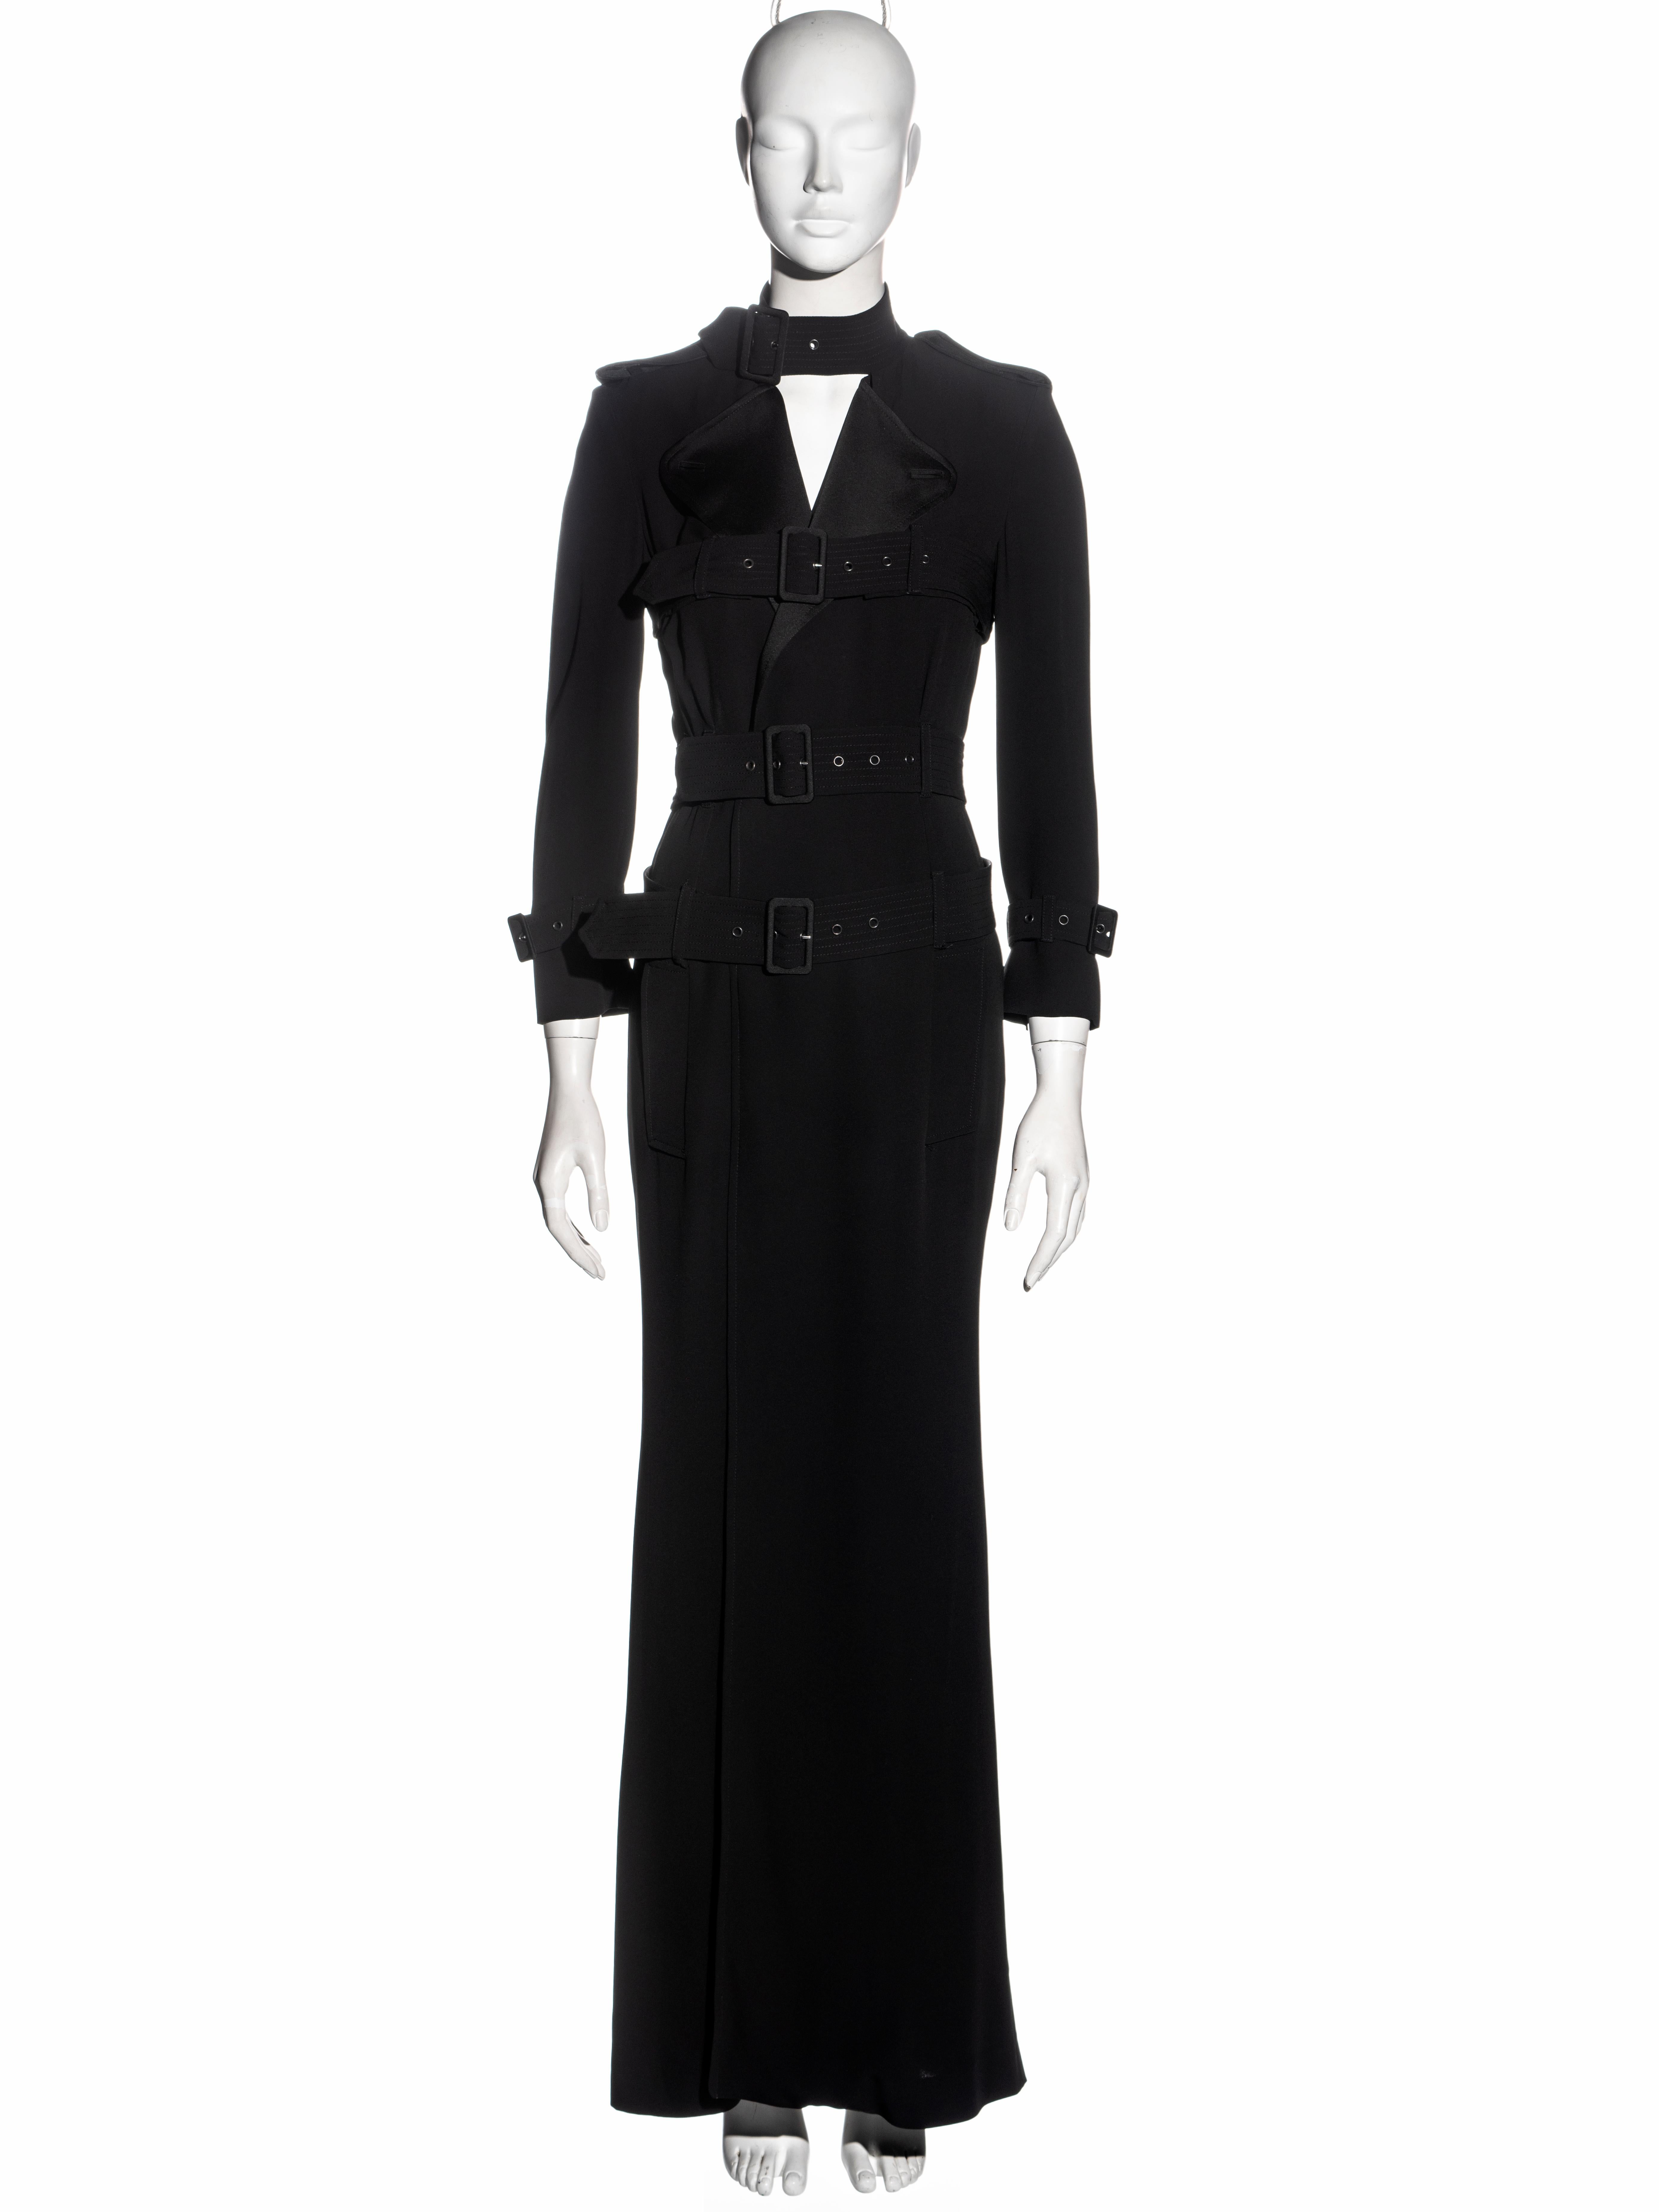 ▪ Jean Paul Gaultier shirt dress
▪ Black Rayon and Acetate blend 
▪ Four attached bondage belts at the hips, waist, bust and neck
▪ Floor-length skirt 
▪ IT 38 - FR 34 - UK 6 - US 4
▪ Fall-Winter 2009
▪ 58% Rayon 42% Acetate
▪ Made in Italy